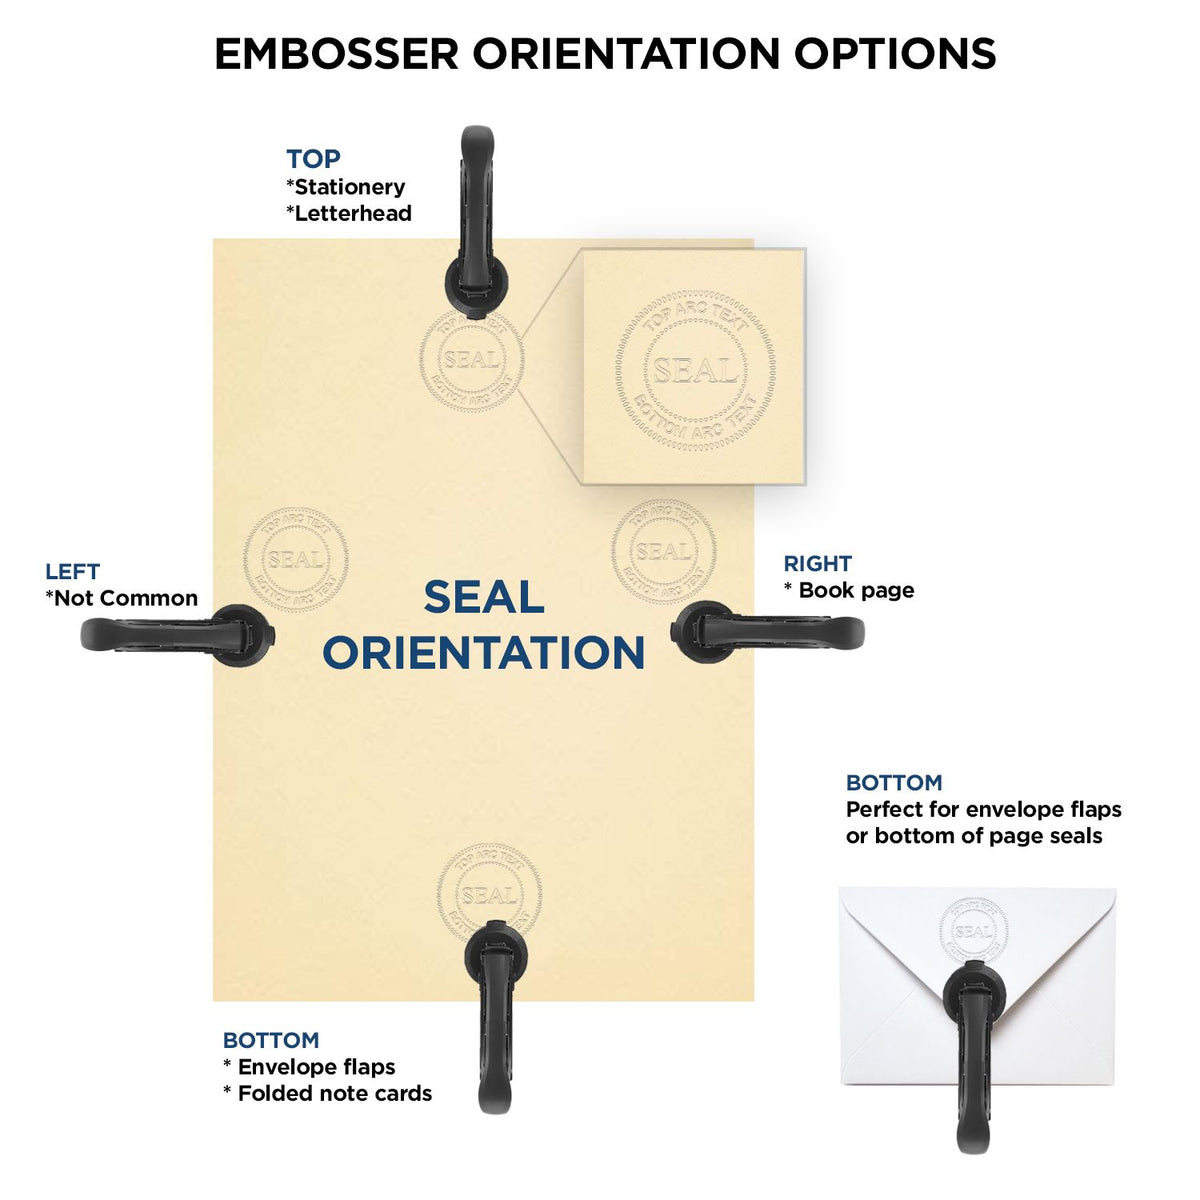 An infographic for the Long Reach Minnesota PE Seal showing embosser orientation, this is showing examples of a top, bottom, right and left insert.